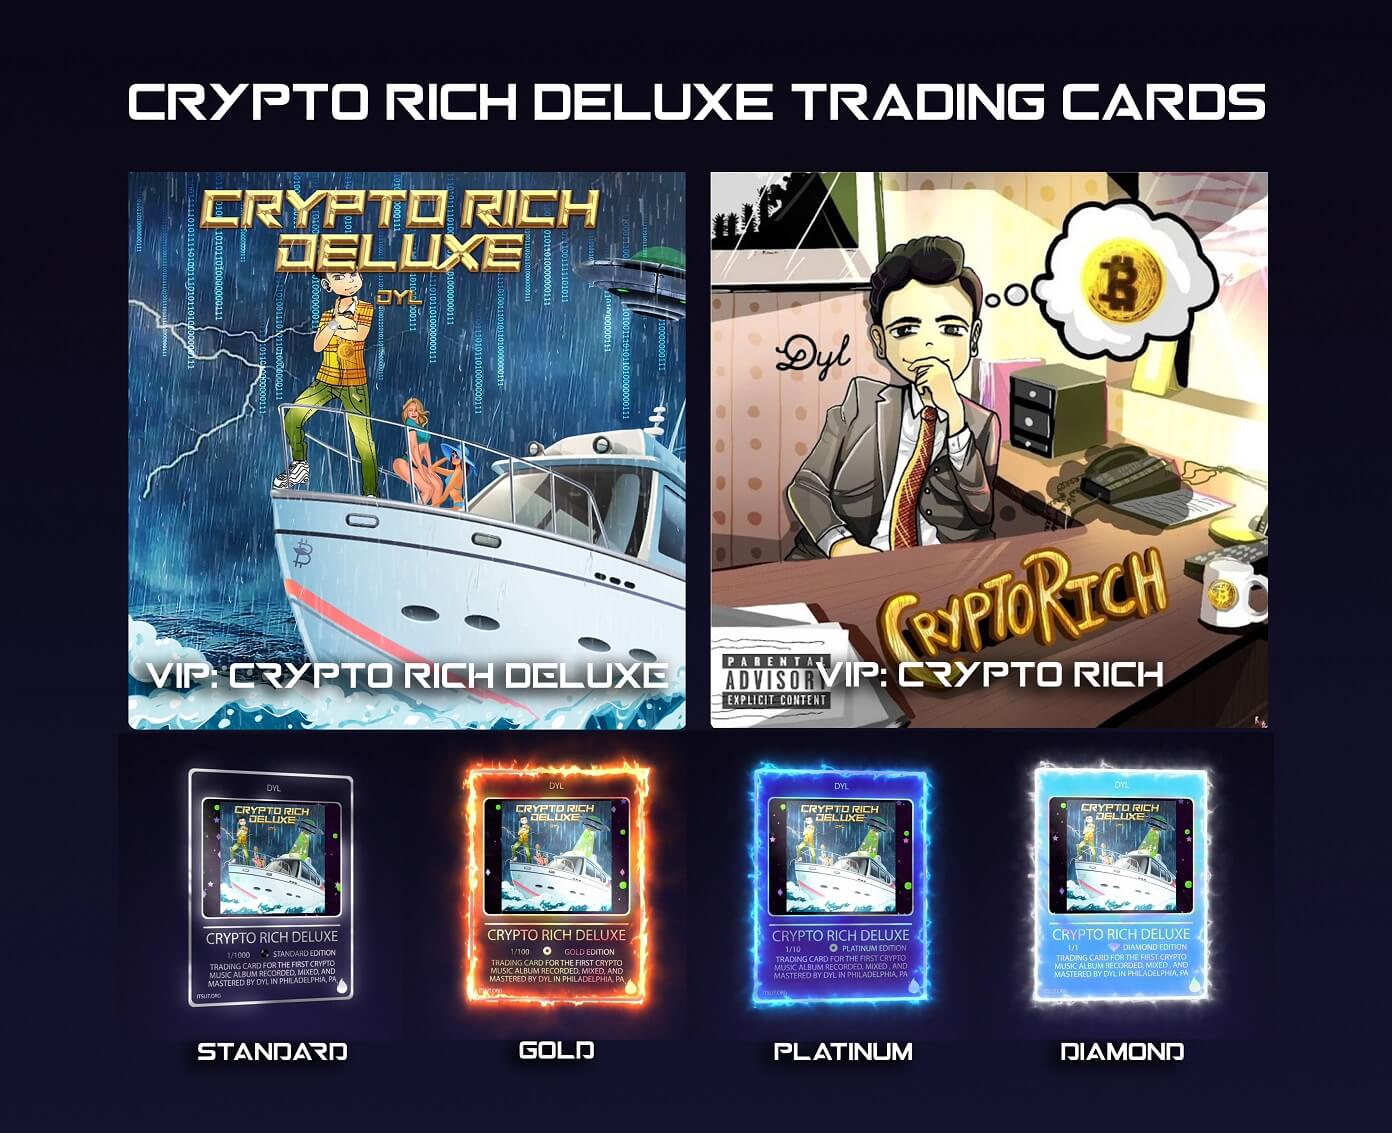 Crypto Rich Deluxe NFT